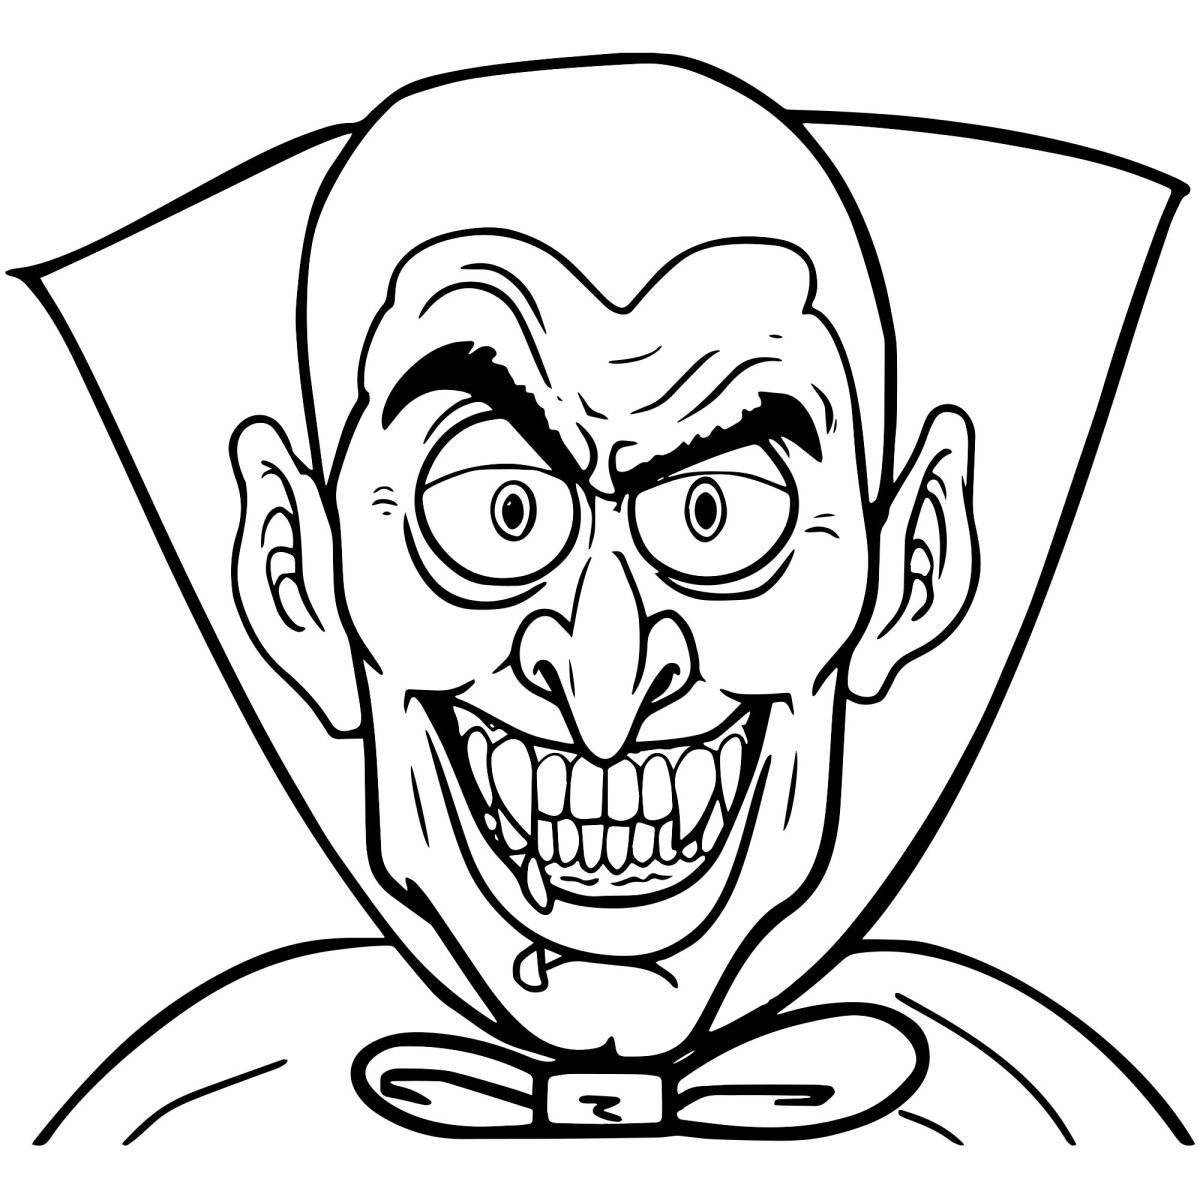 Vampire coloring pages for girls